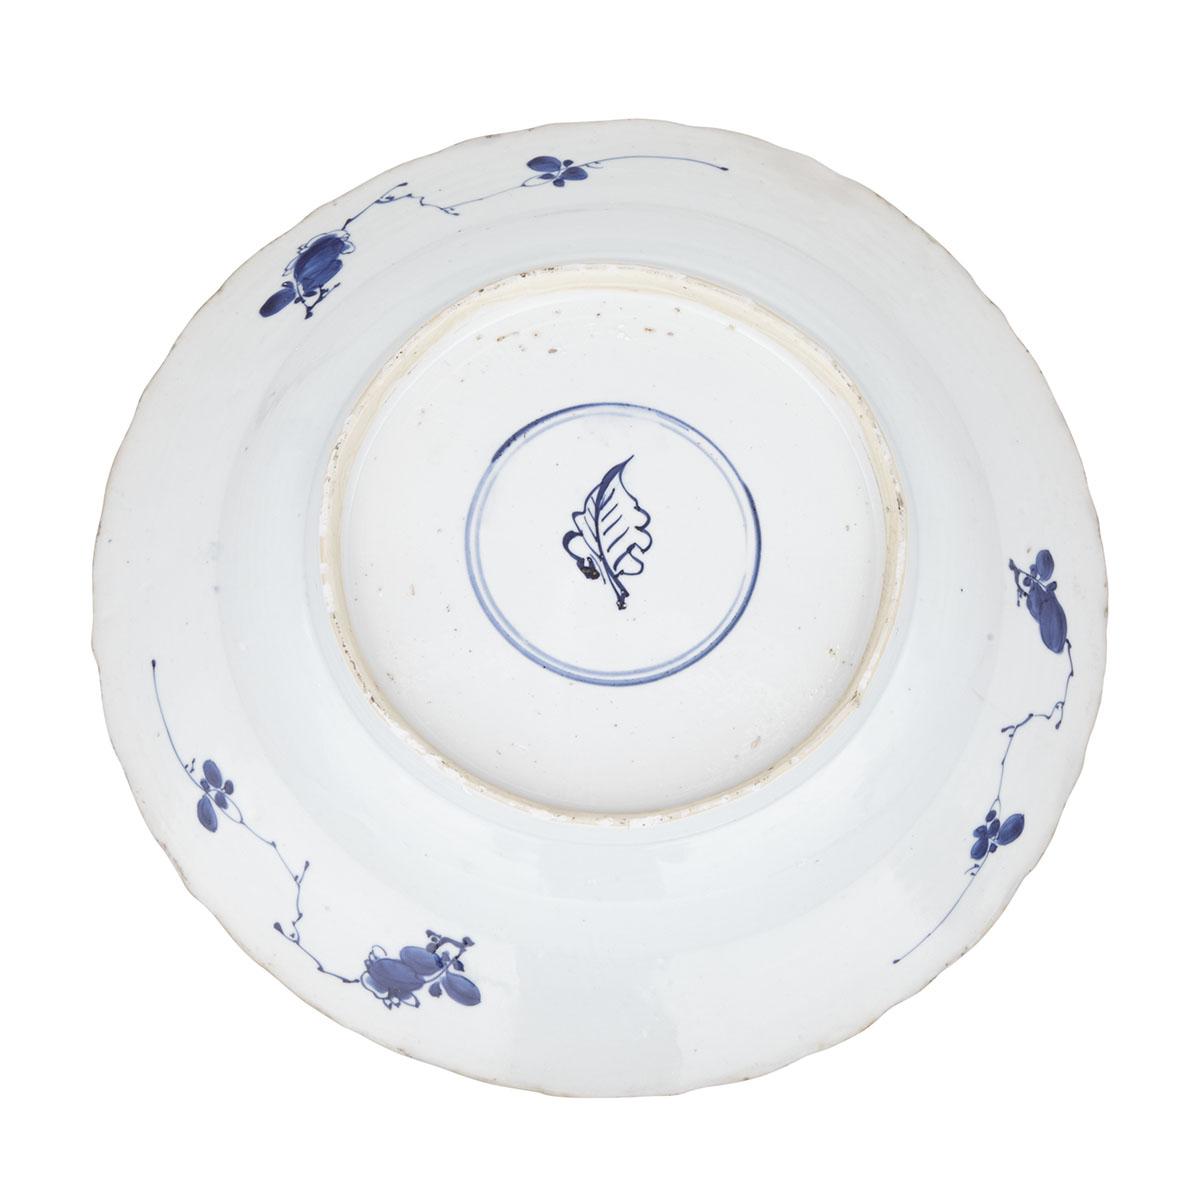 A LARGE BLUE AND WHITE CHARGER, MARK AND OF KANGXI PERIOD (1662-1722) 清康熙 青花花卉蓮瓣紋盤 Of a lotus flower - Image 2 of 2